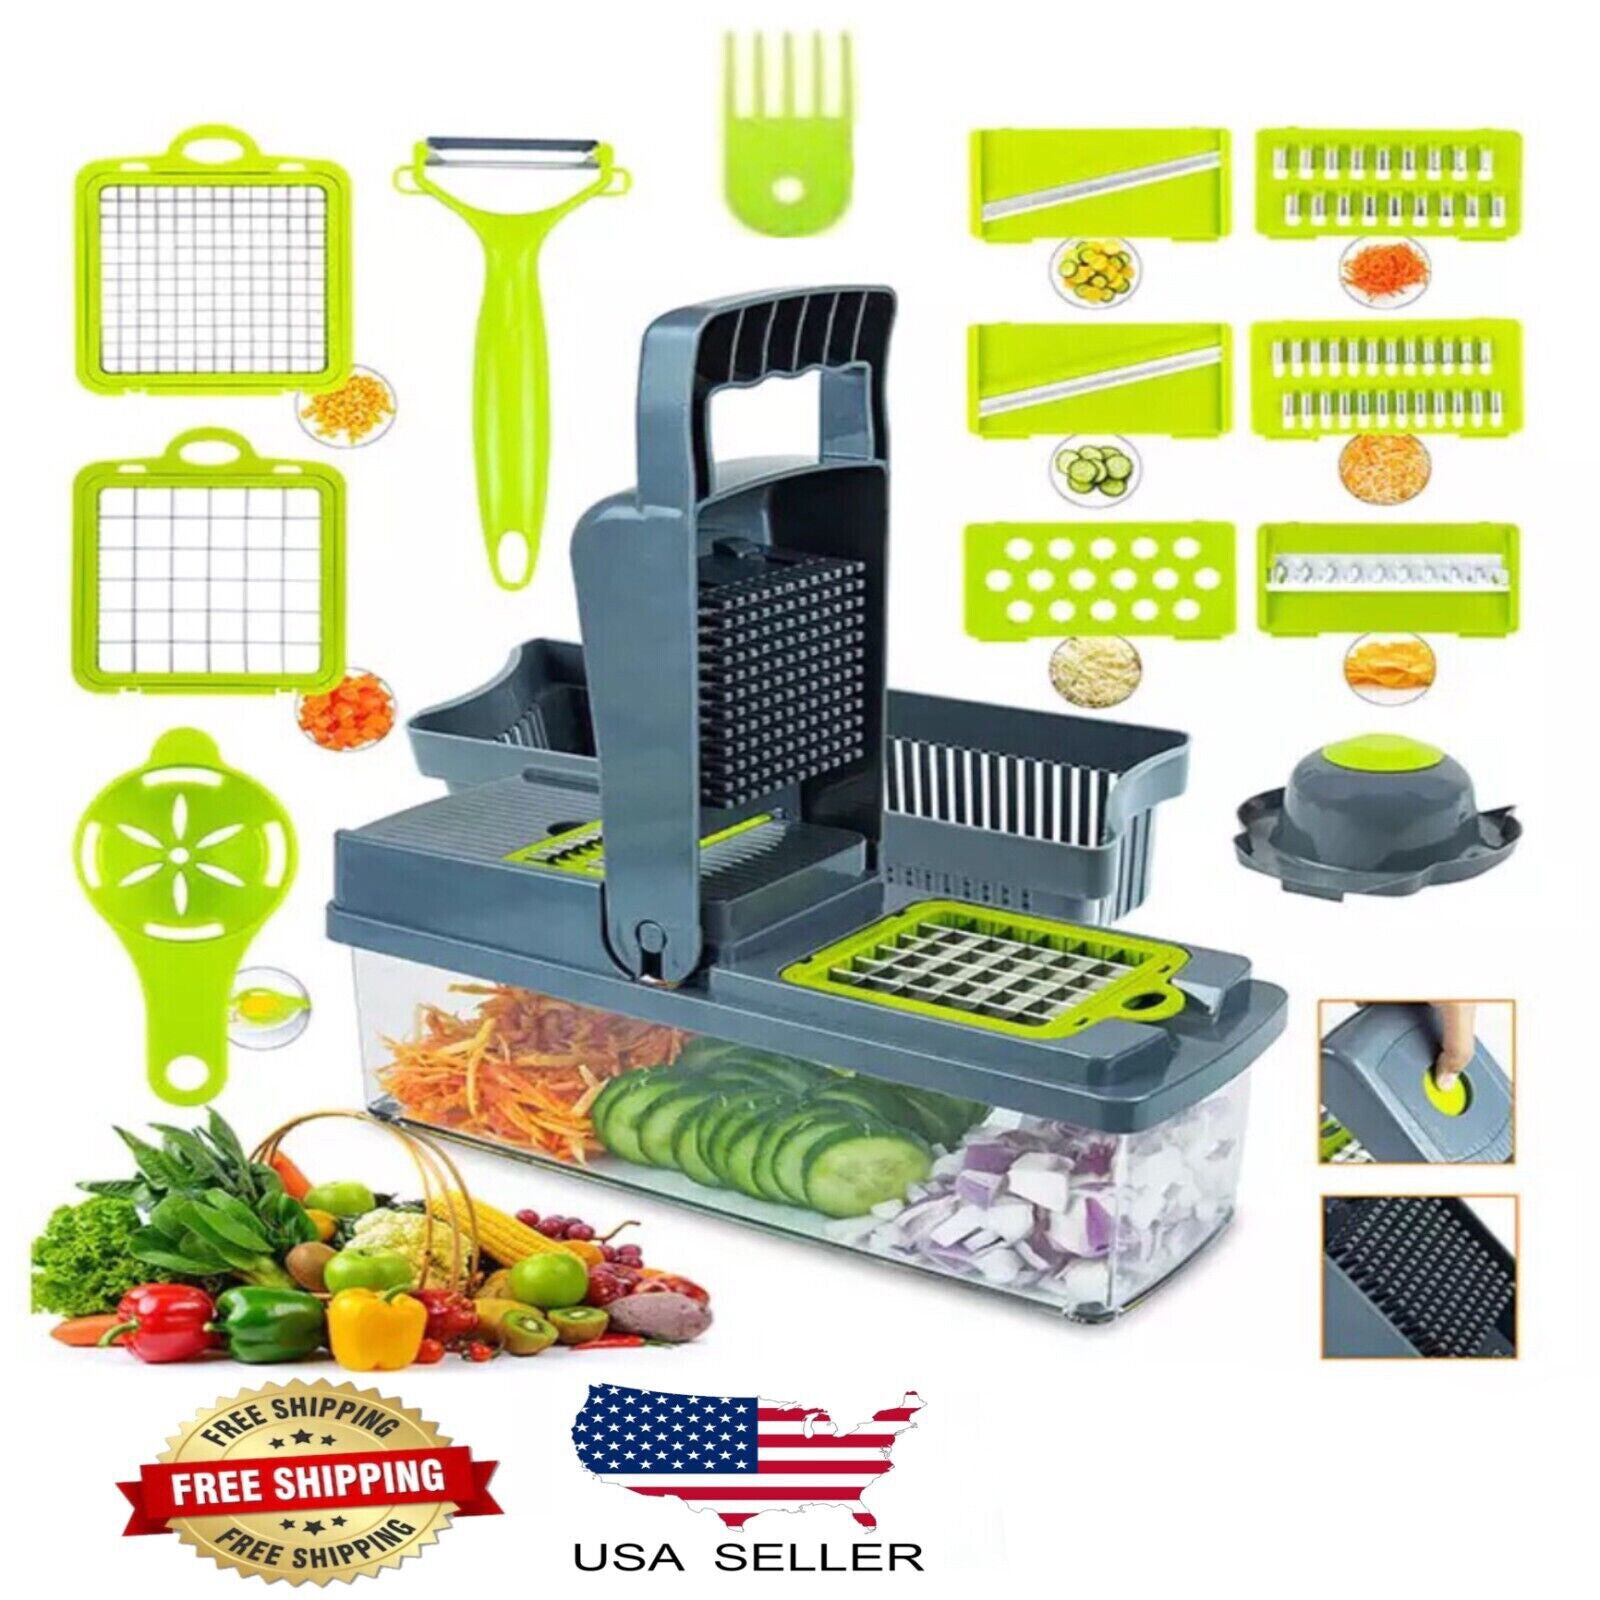 The Ultimate Kitchen Tool 16-In-1 Vegetable Fruit Chopper Cutter